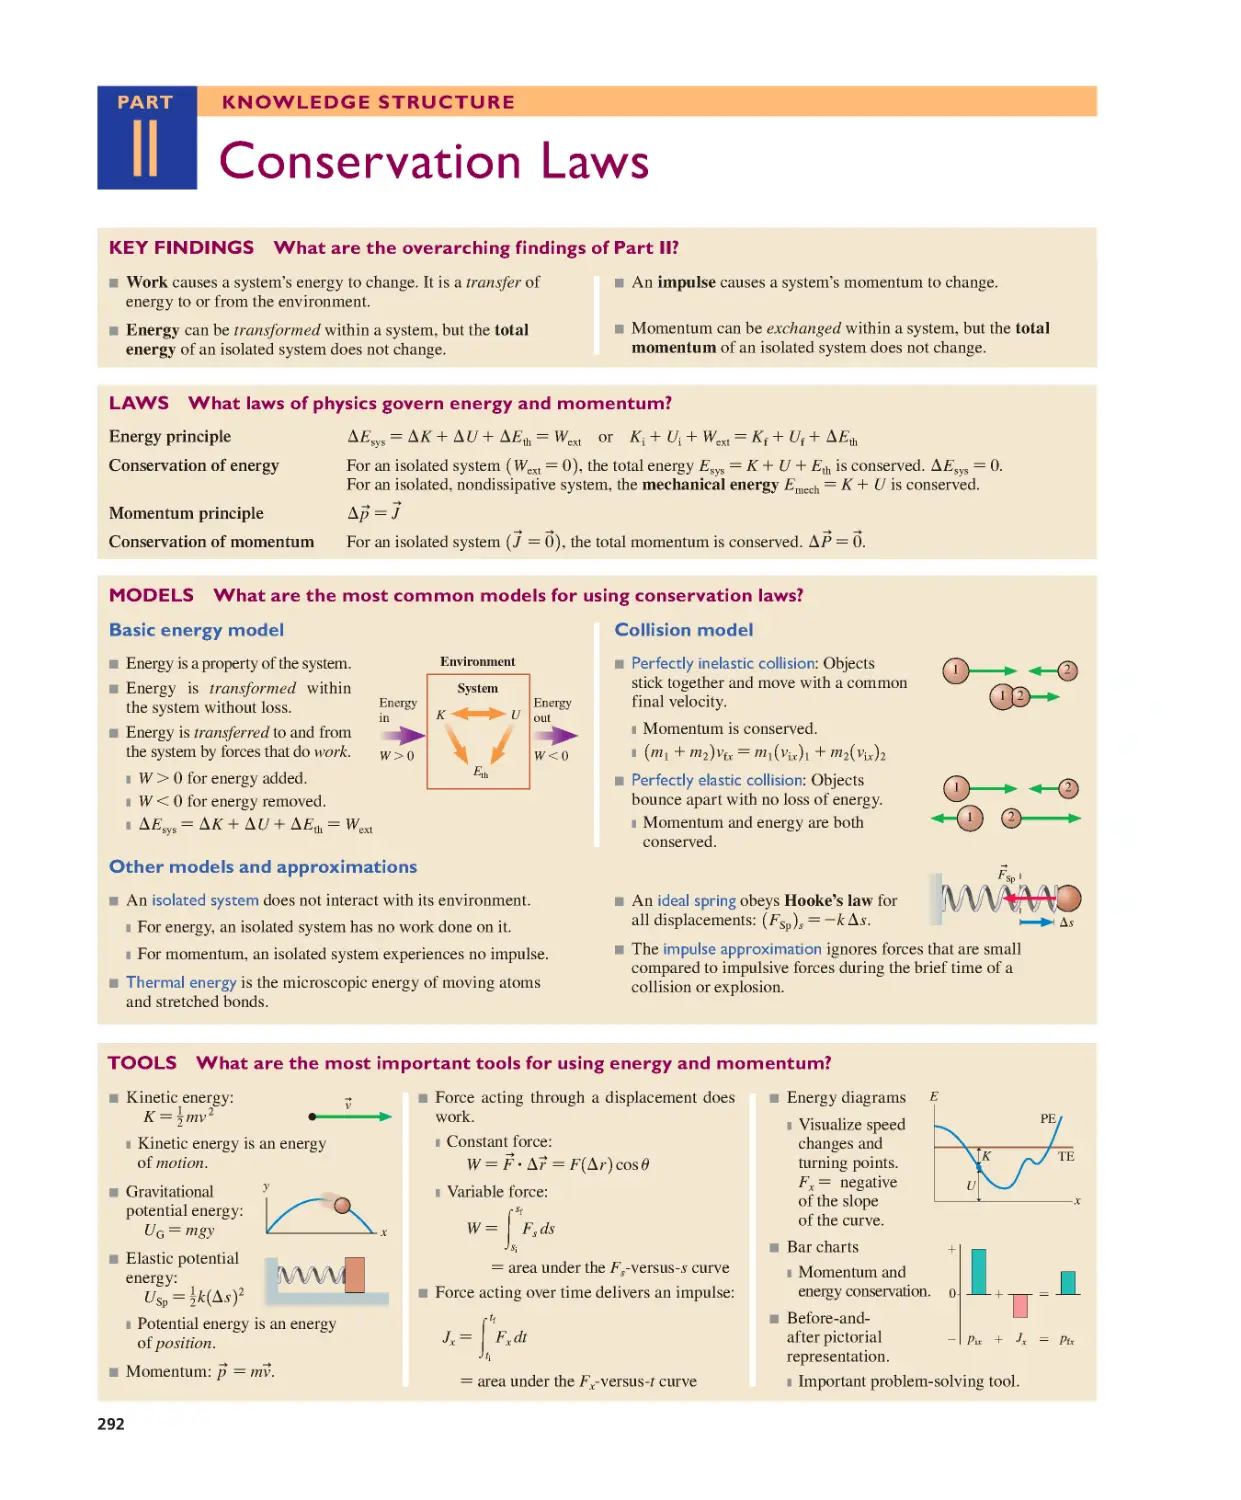 Part II: Knowledge Structure: Conservation Laws